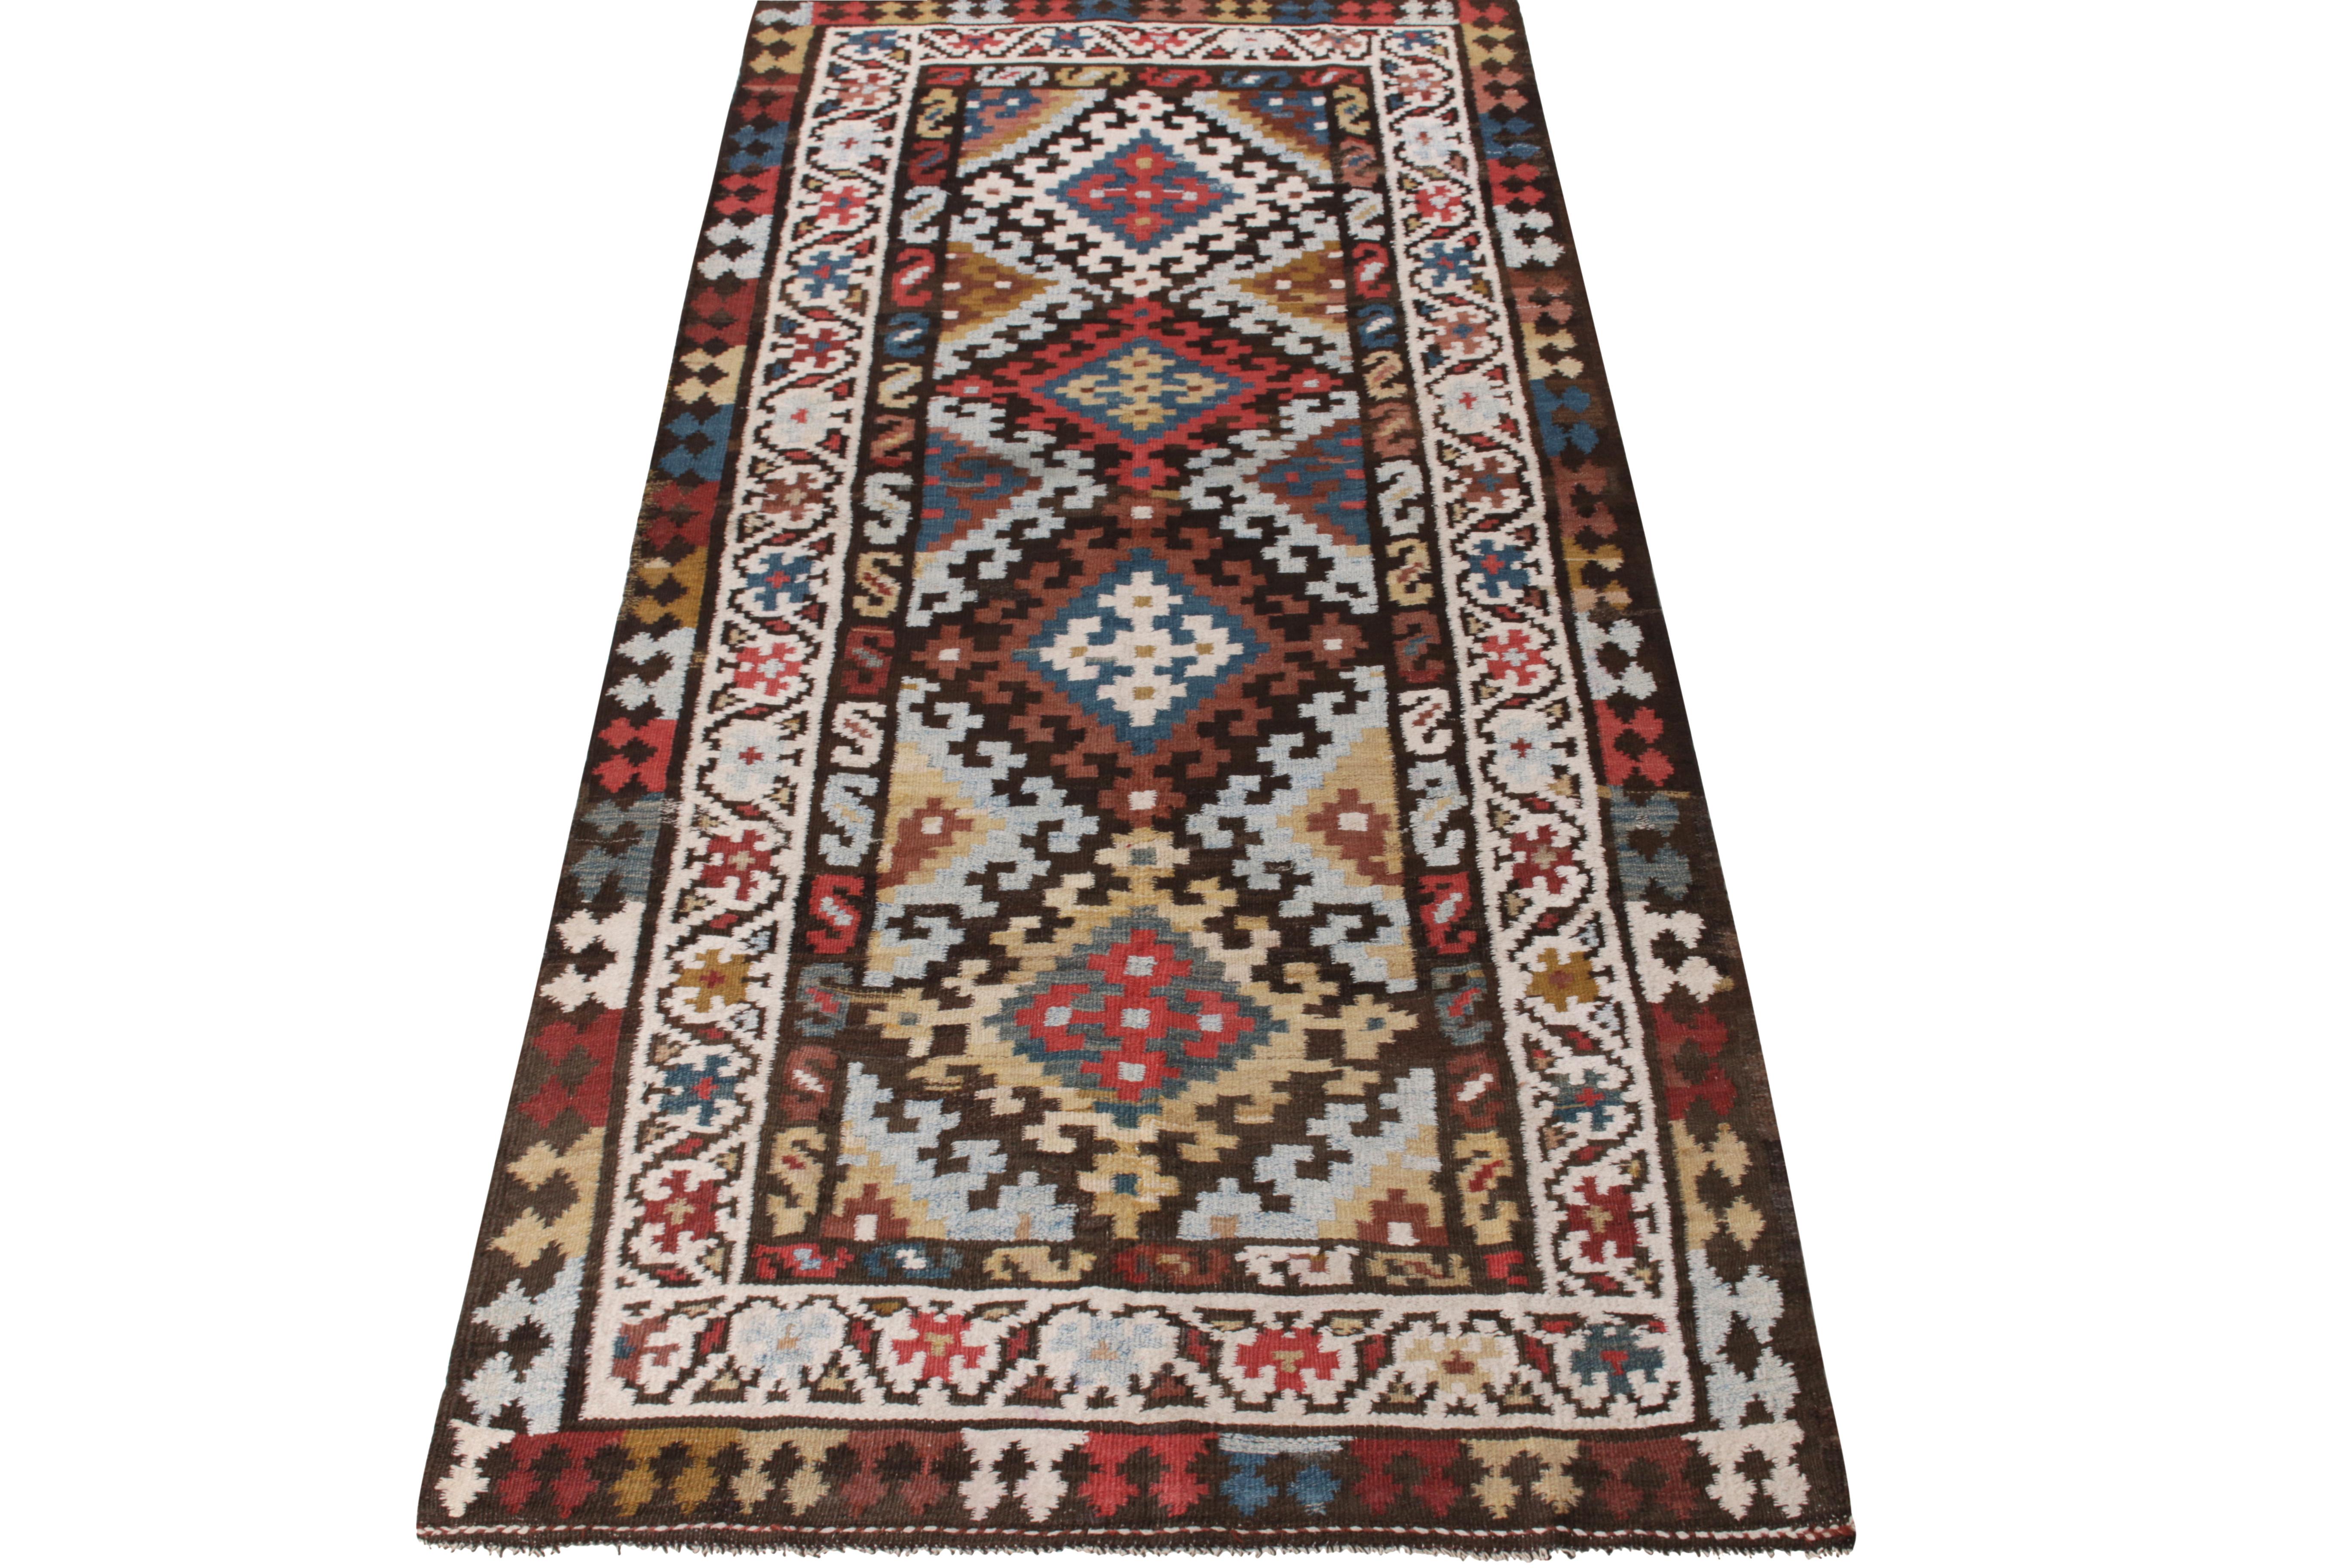 A rustic vintage Kilim gallery rug enjoying nomadic sensibilities entering our Kilim & Flatweave collection. Relishing tribal motifs in a traditional colorway of variegated tones, joyfully gracing the bold geometric pattern - together glorifying